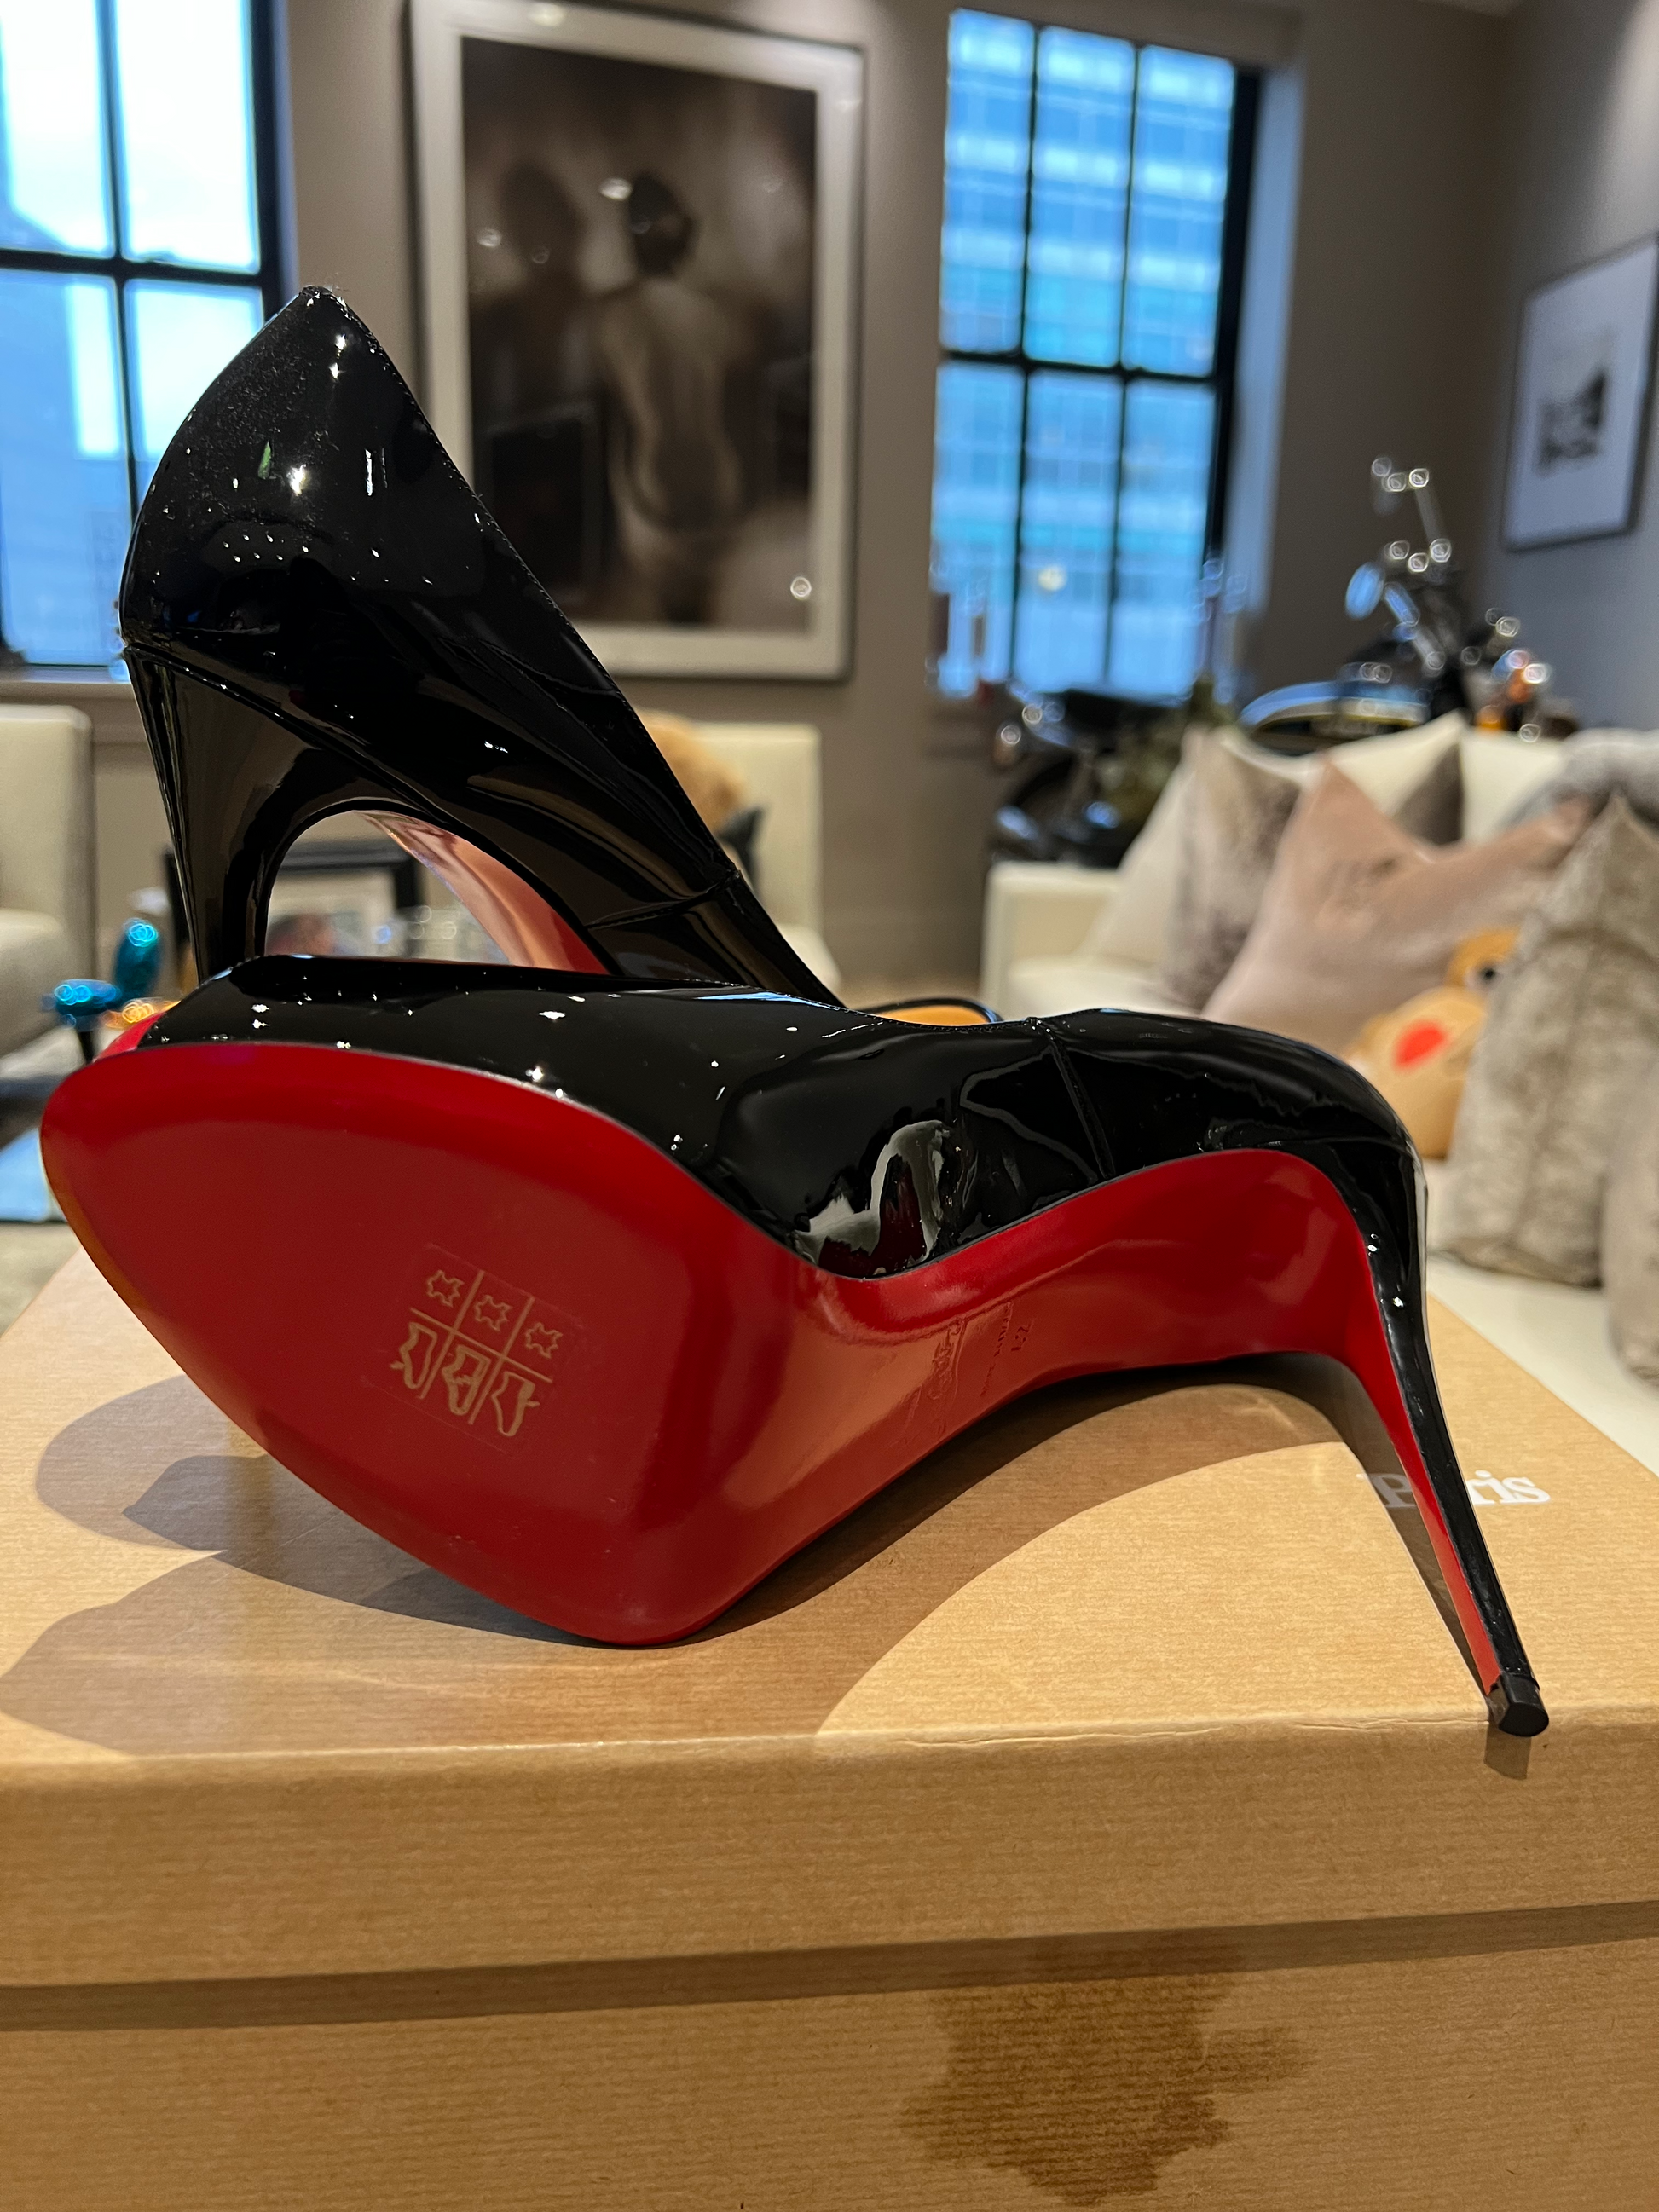 Christian Louboutin New Very Prive 120 Patent Pump